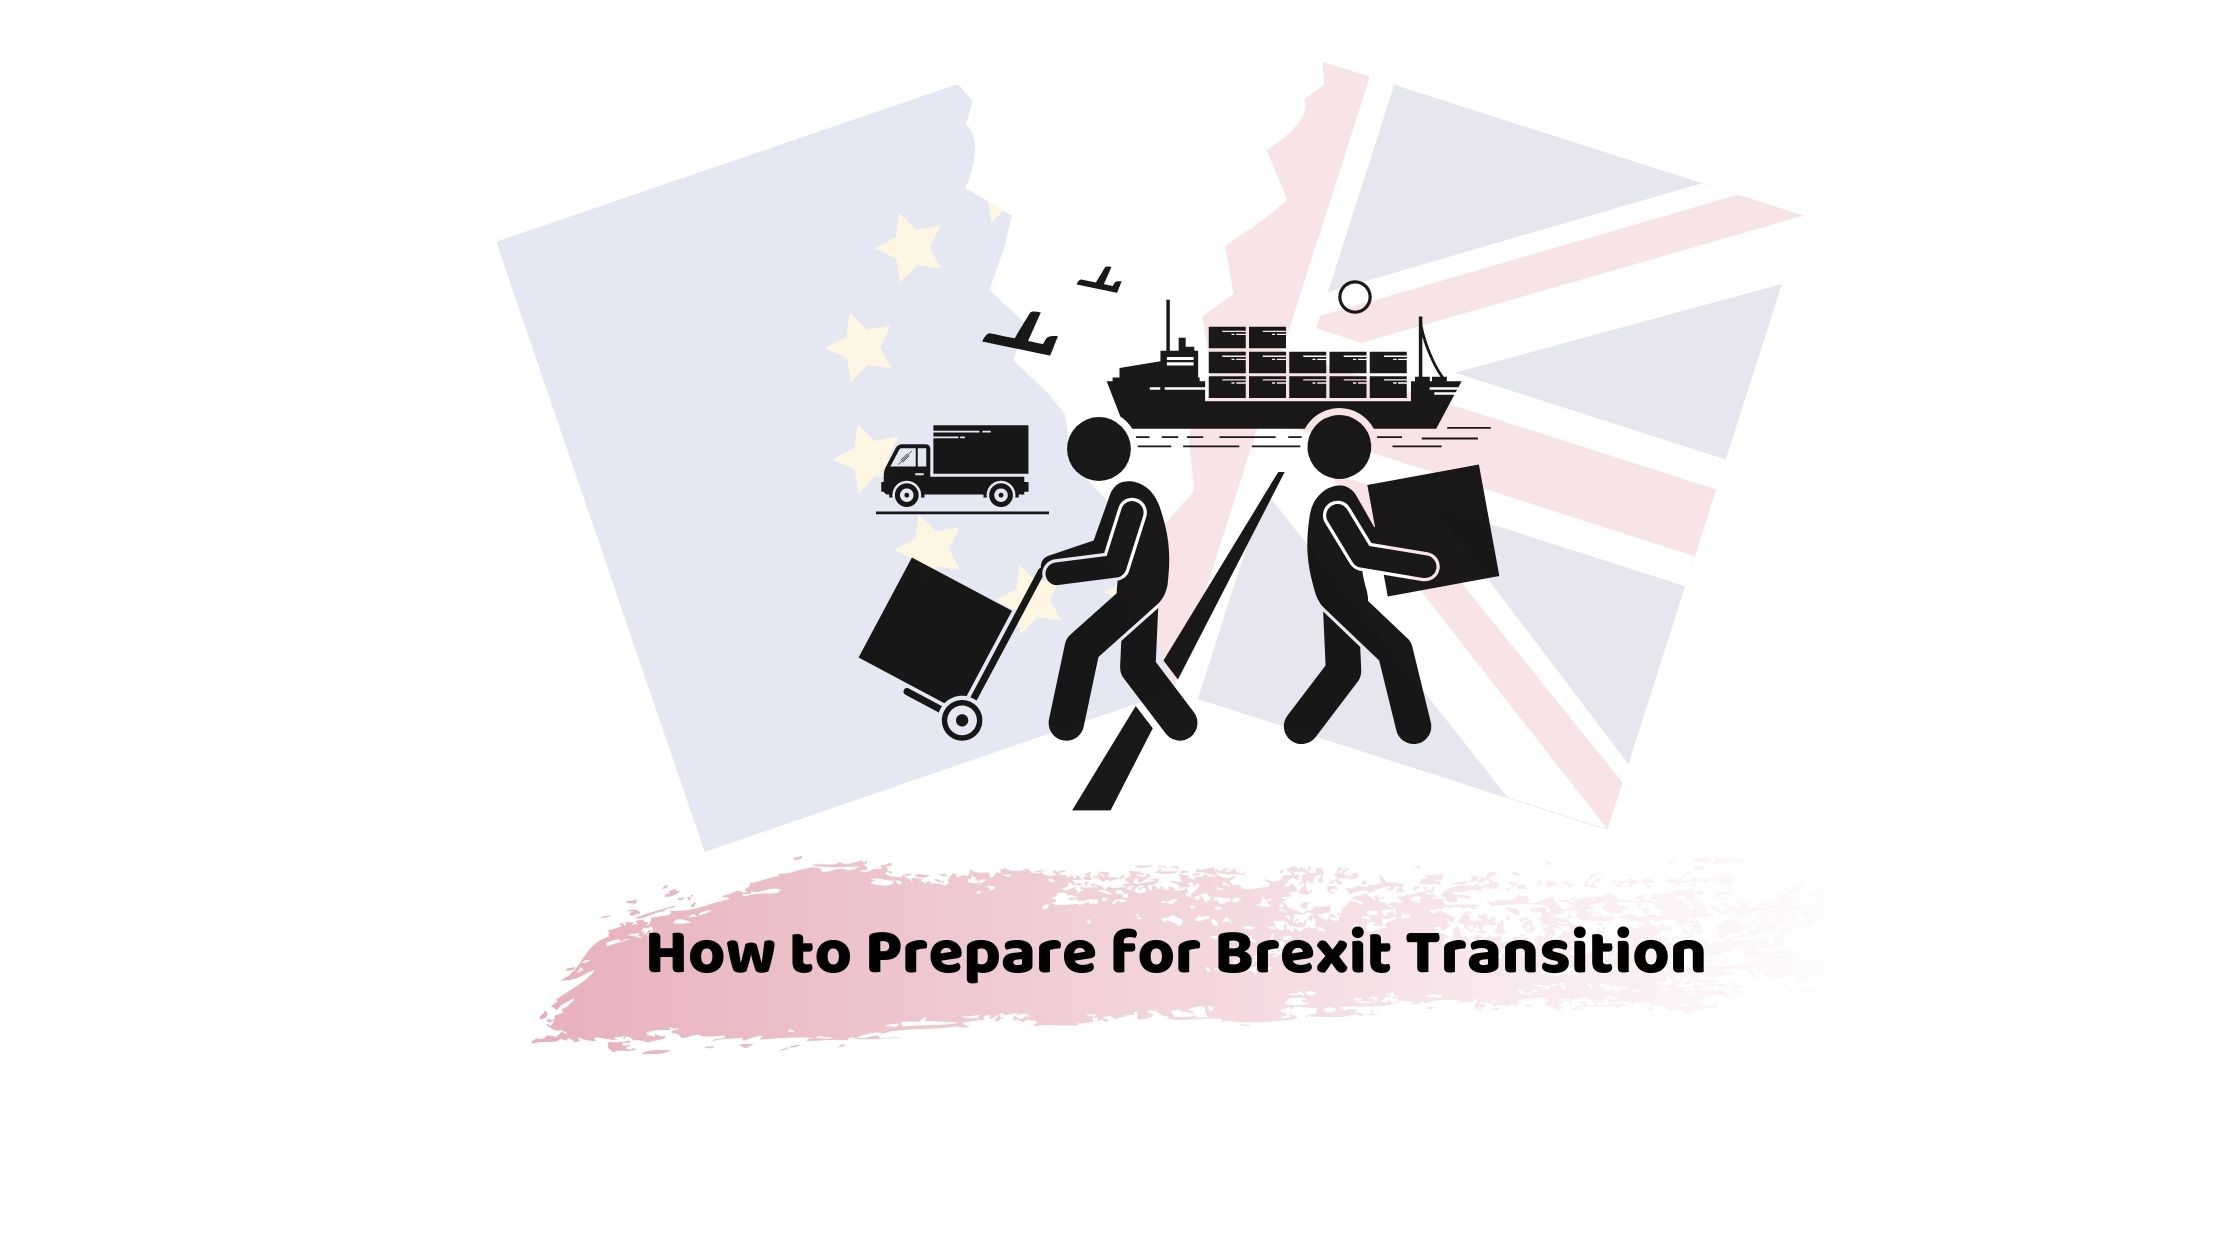 How to prepare for Brexit